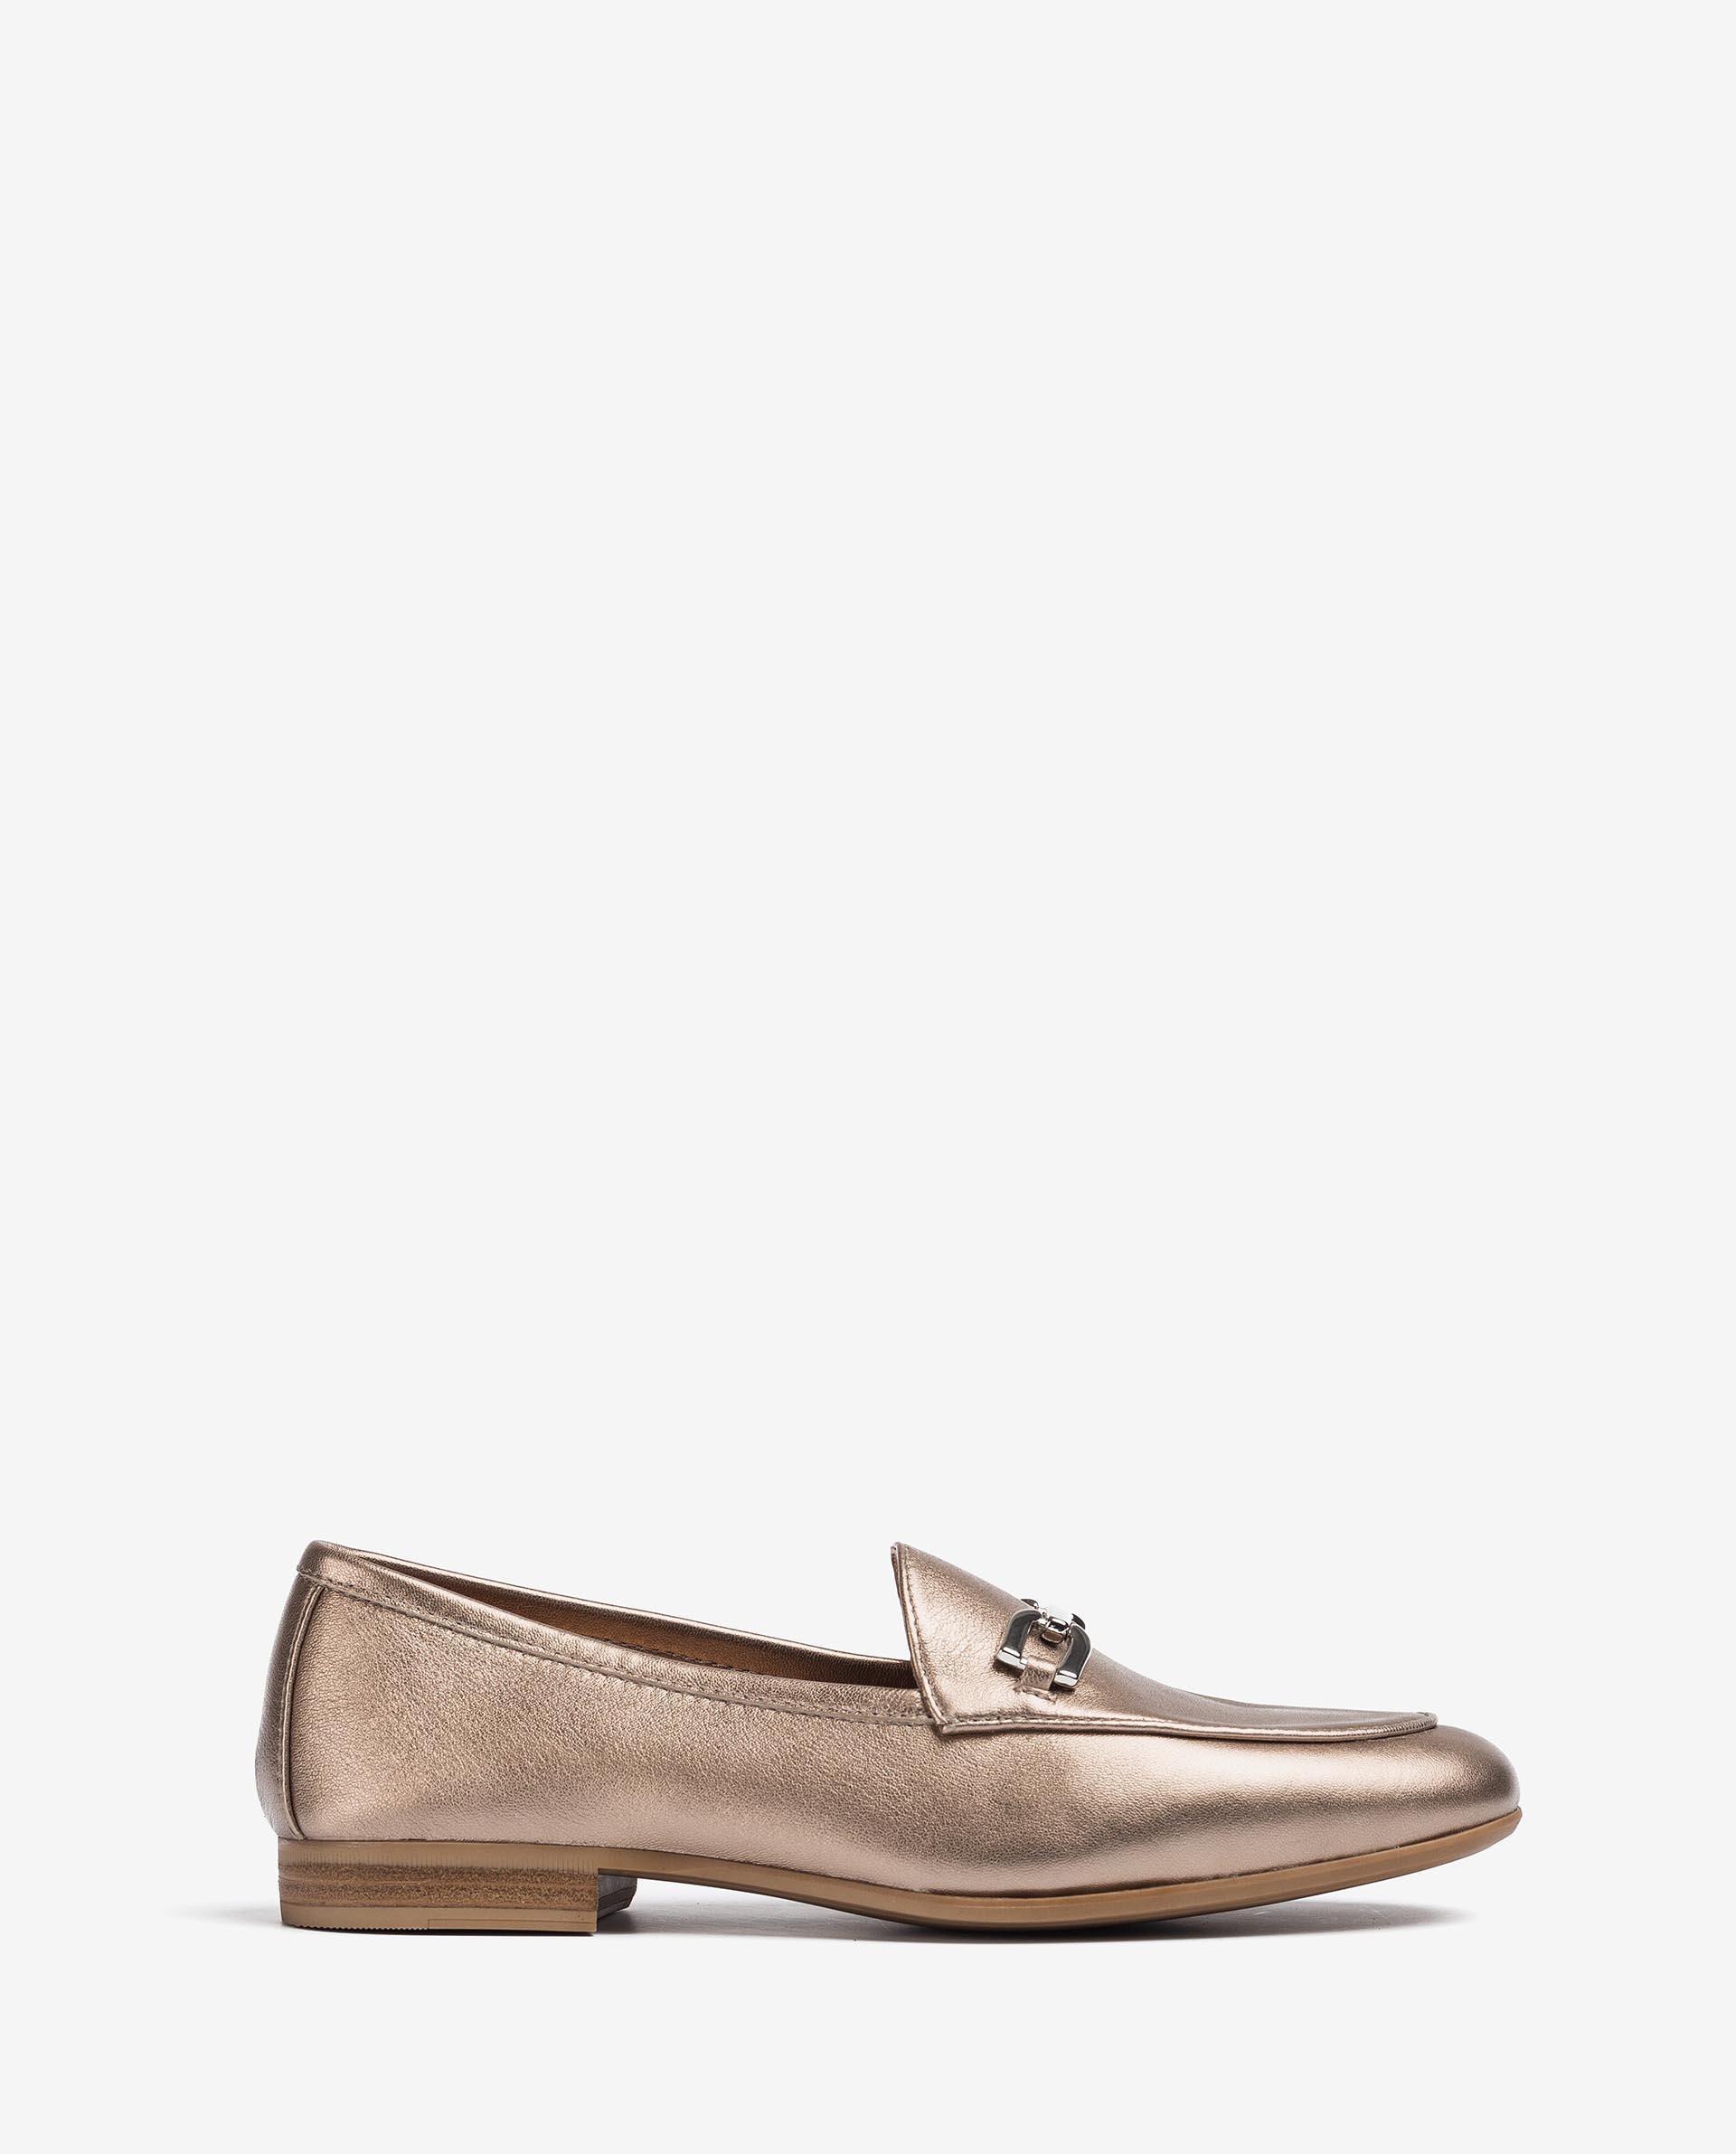 UNISA Metal effect leather loafers DALCY_21_LMT 2